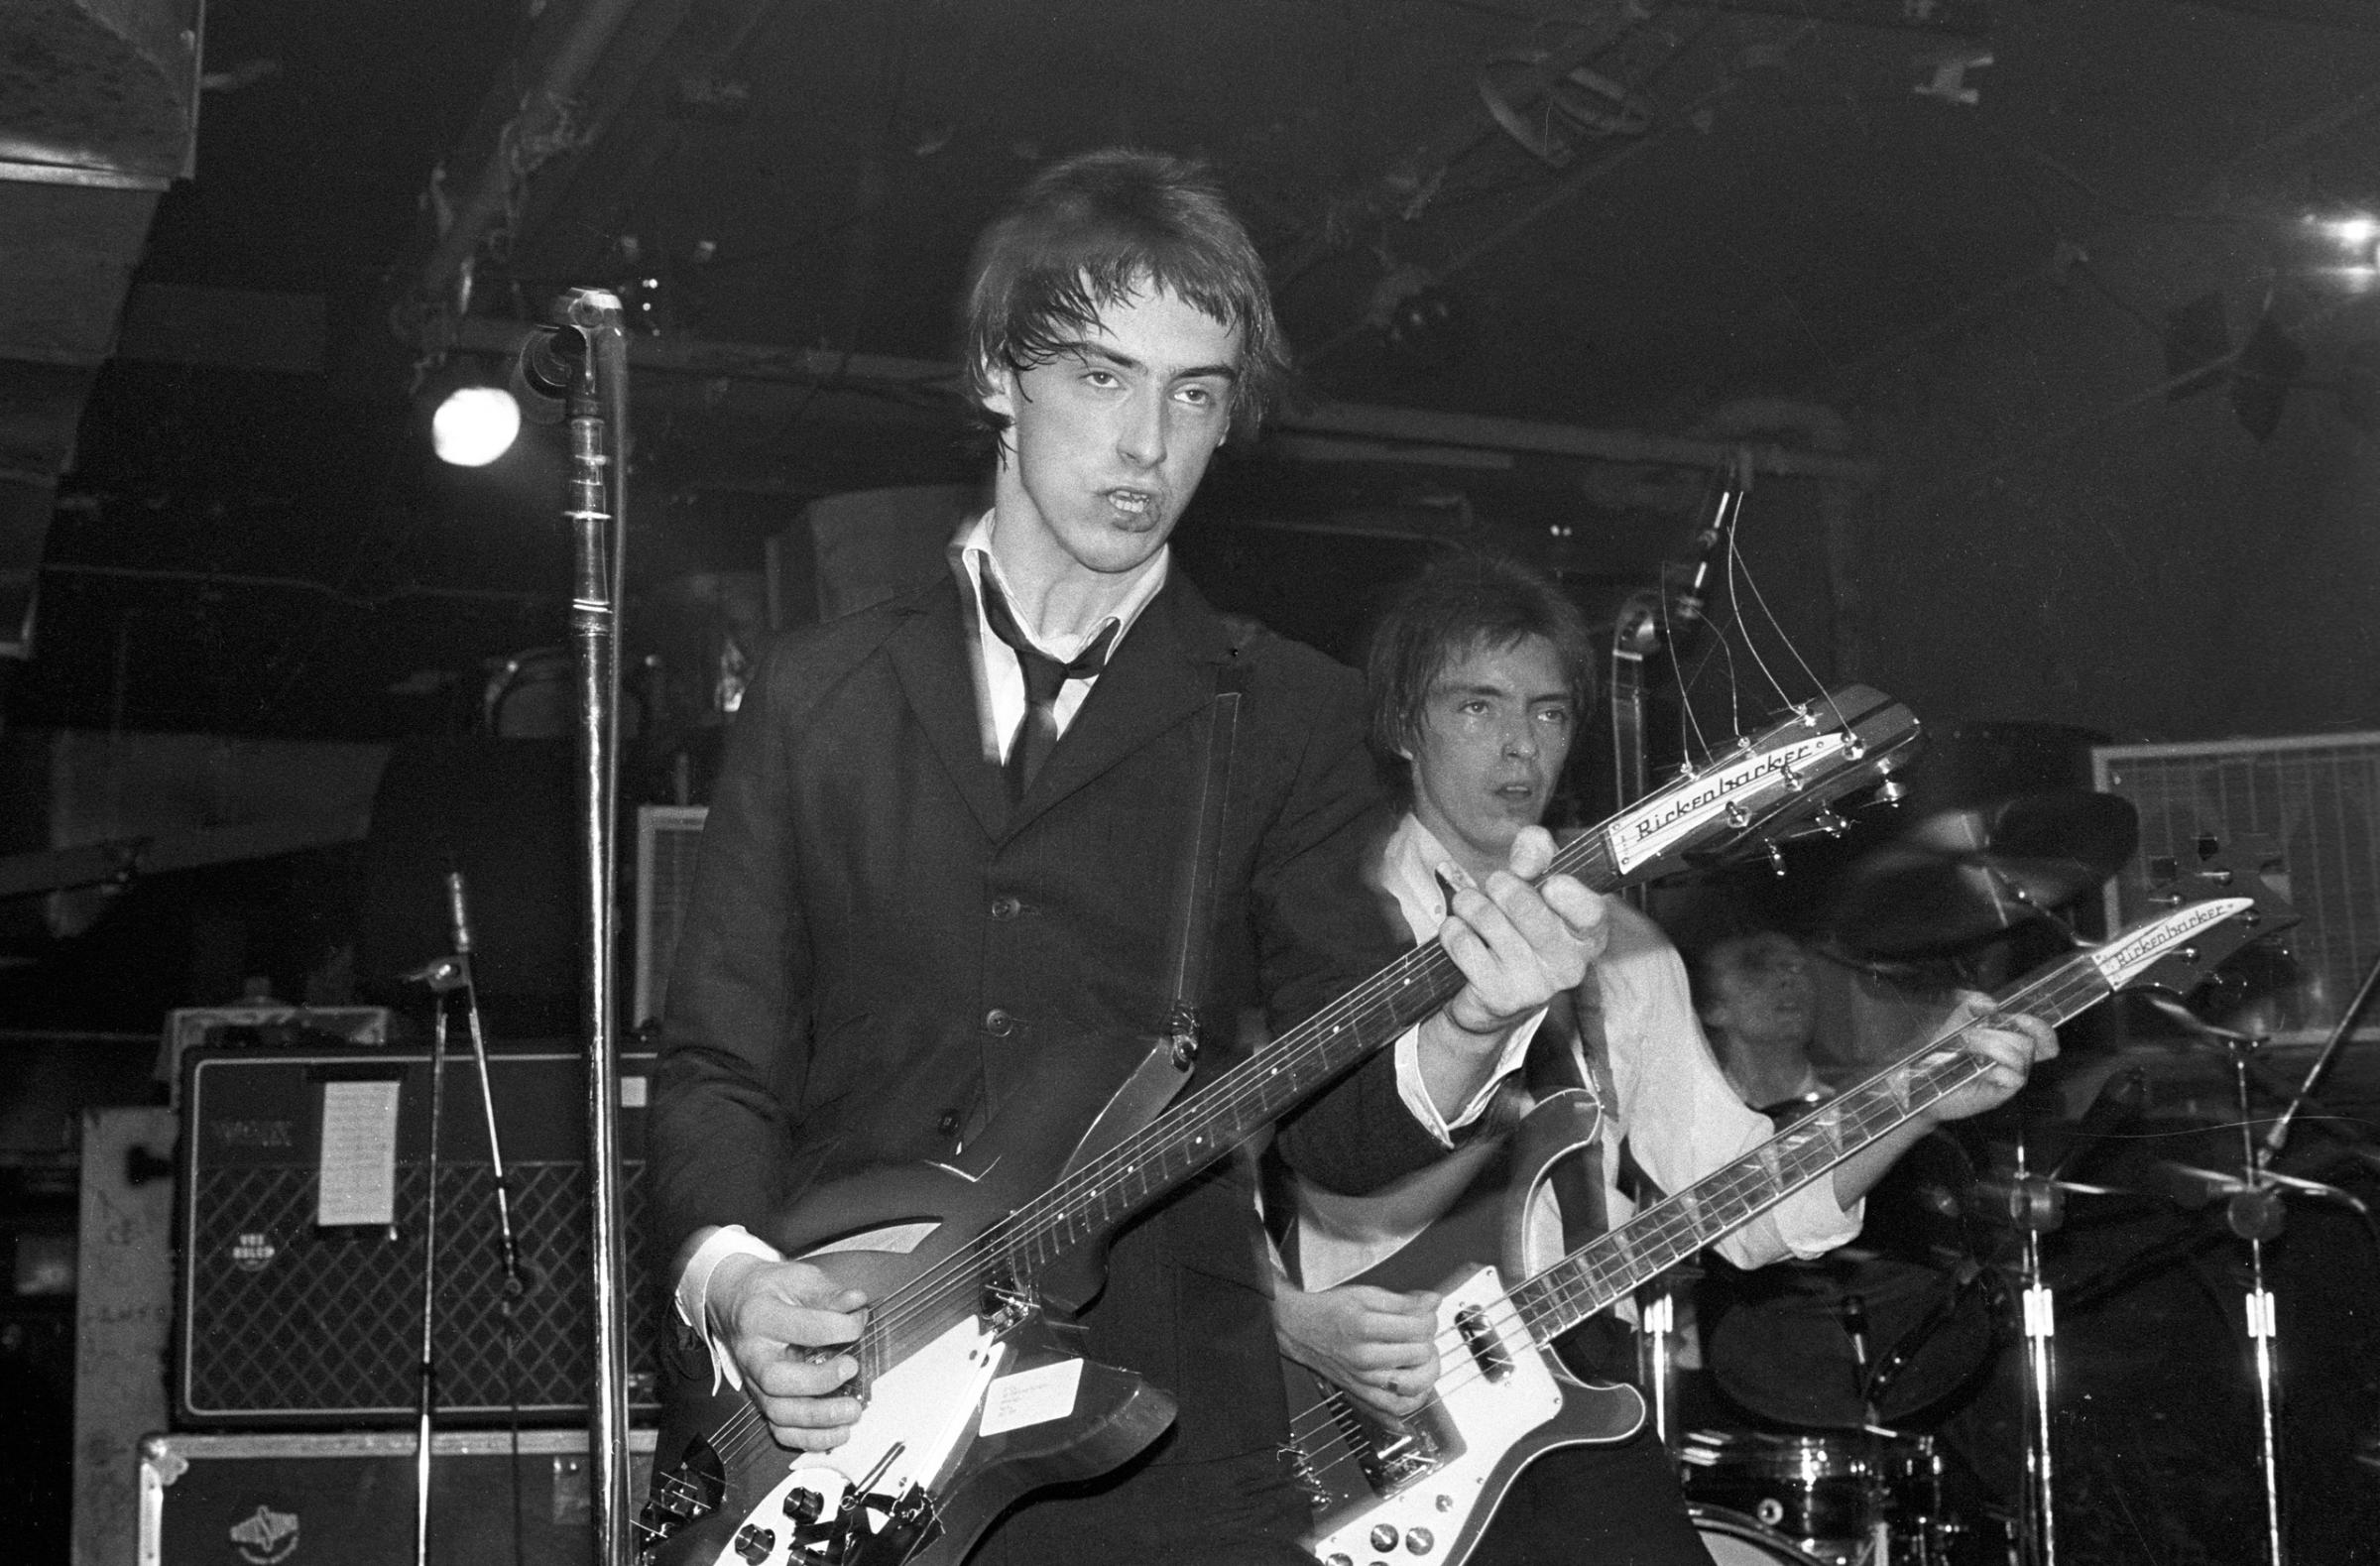 Paul Weller and Bruce Foxton, members of The JAM, performing at CBGB's on October 15, 1977.